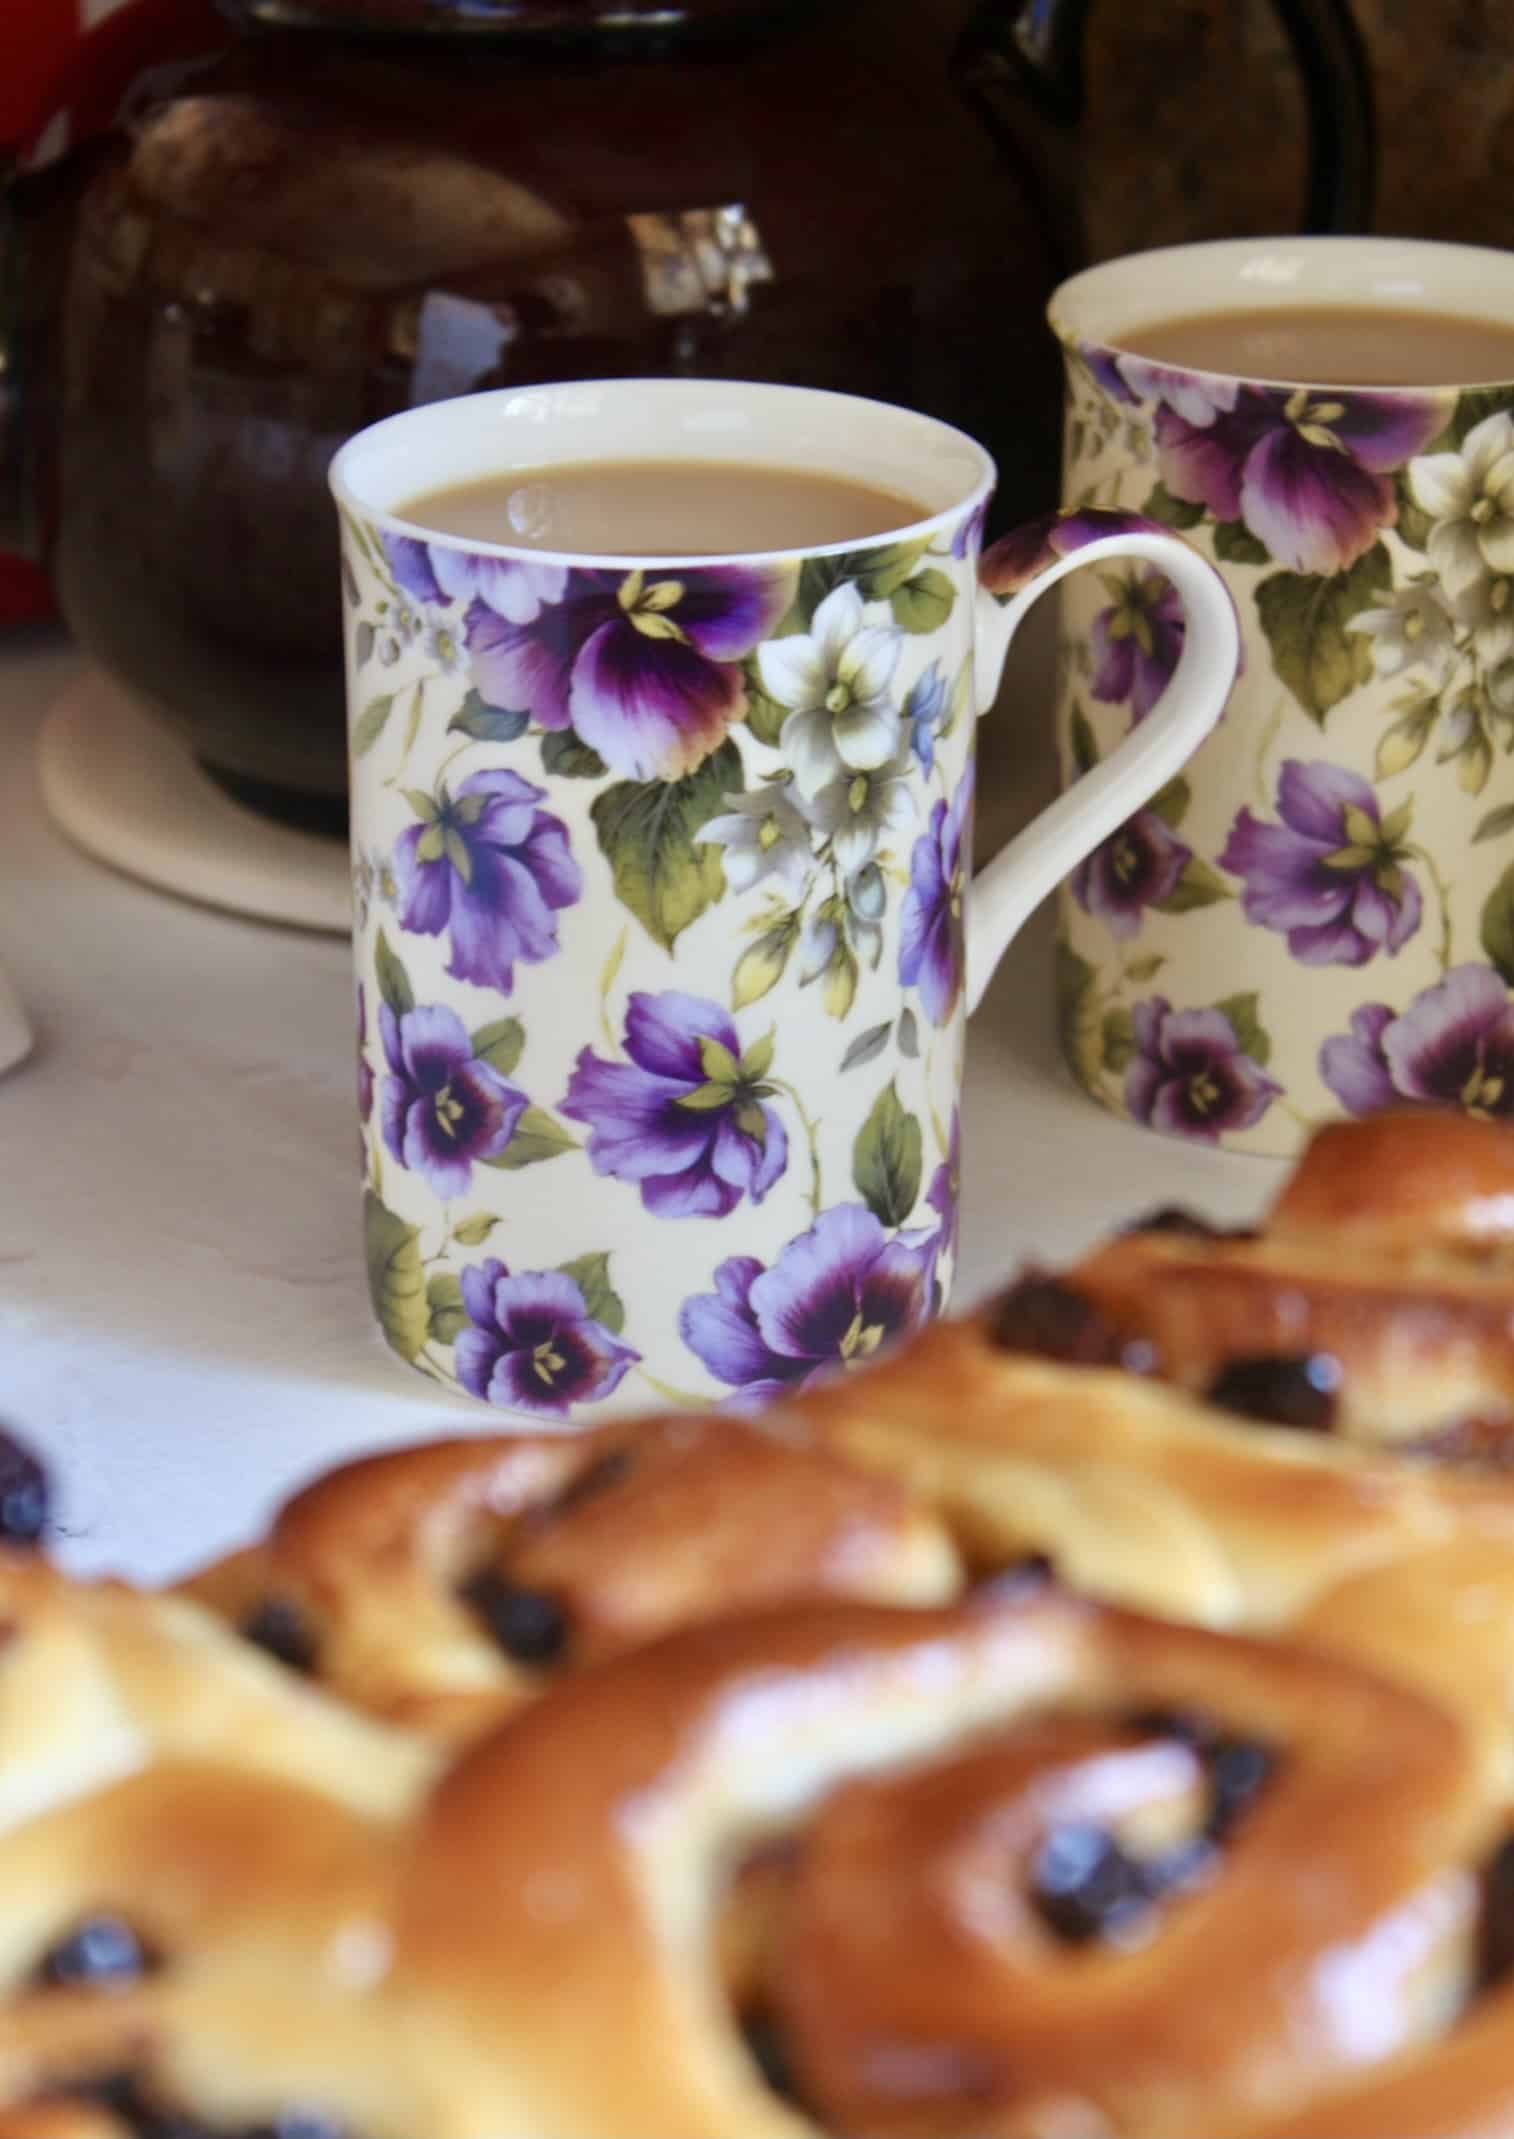 cup of tea with Chelsea buns in foreground